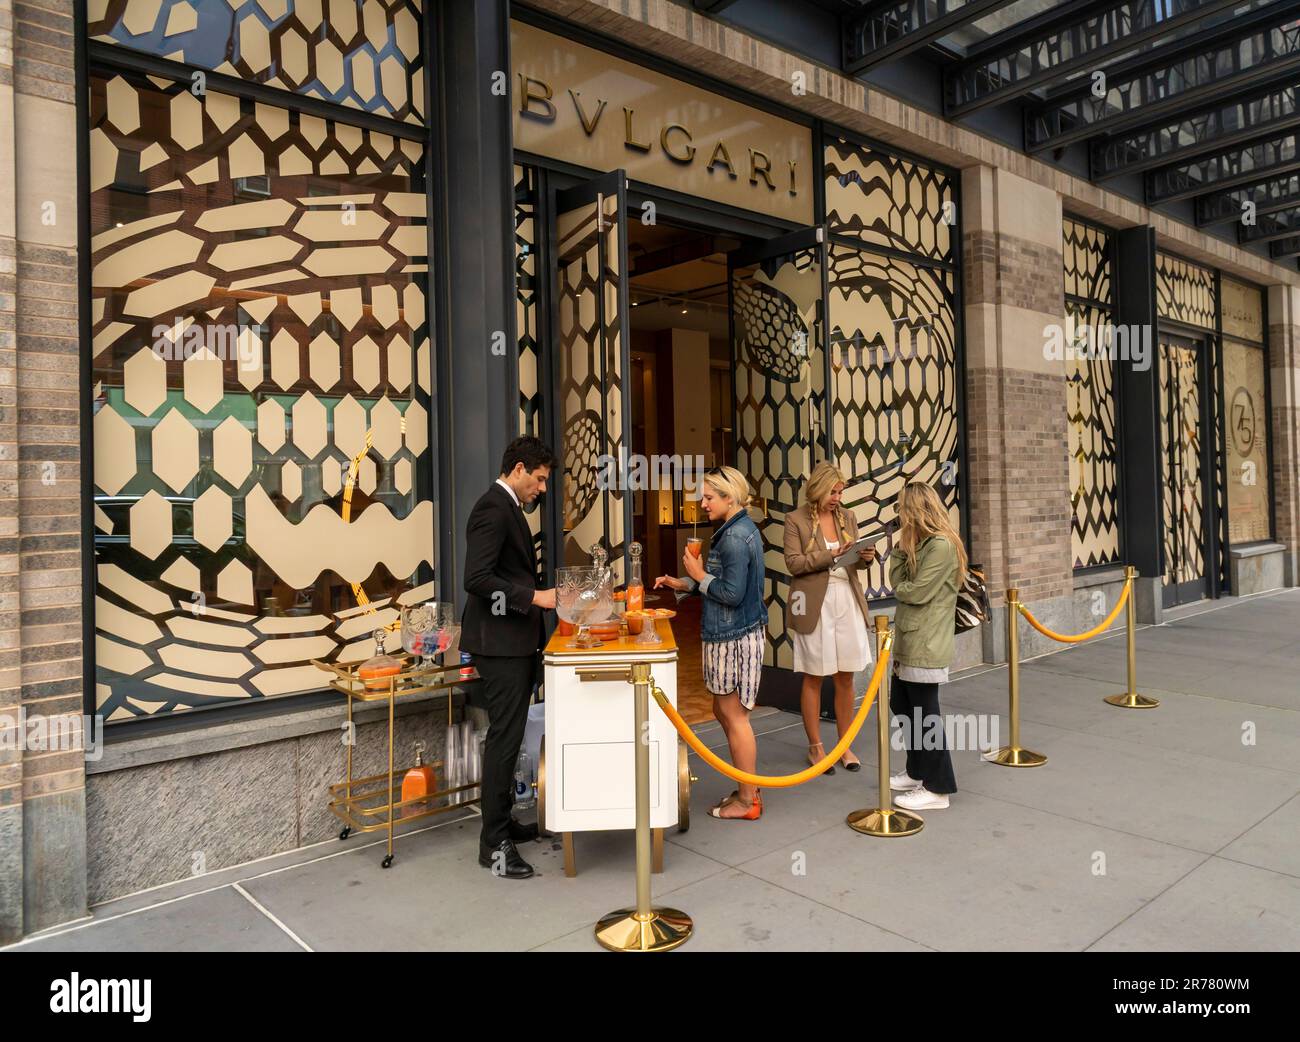 Check-in for the opening of the new Bulgari store in the